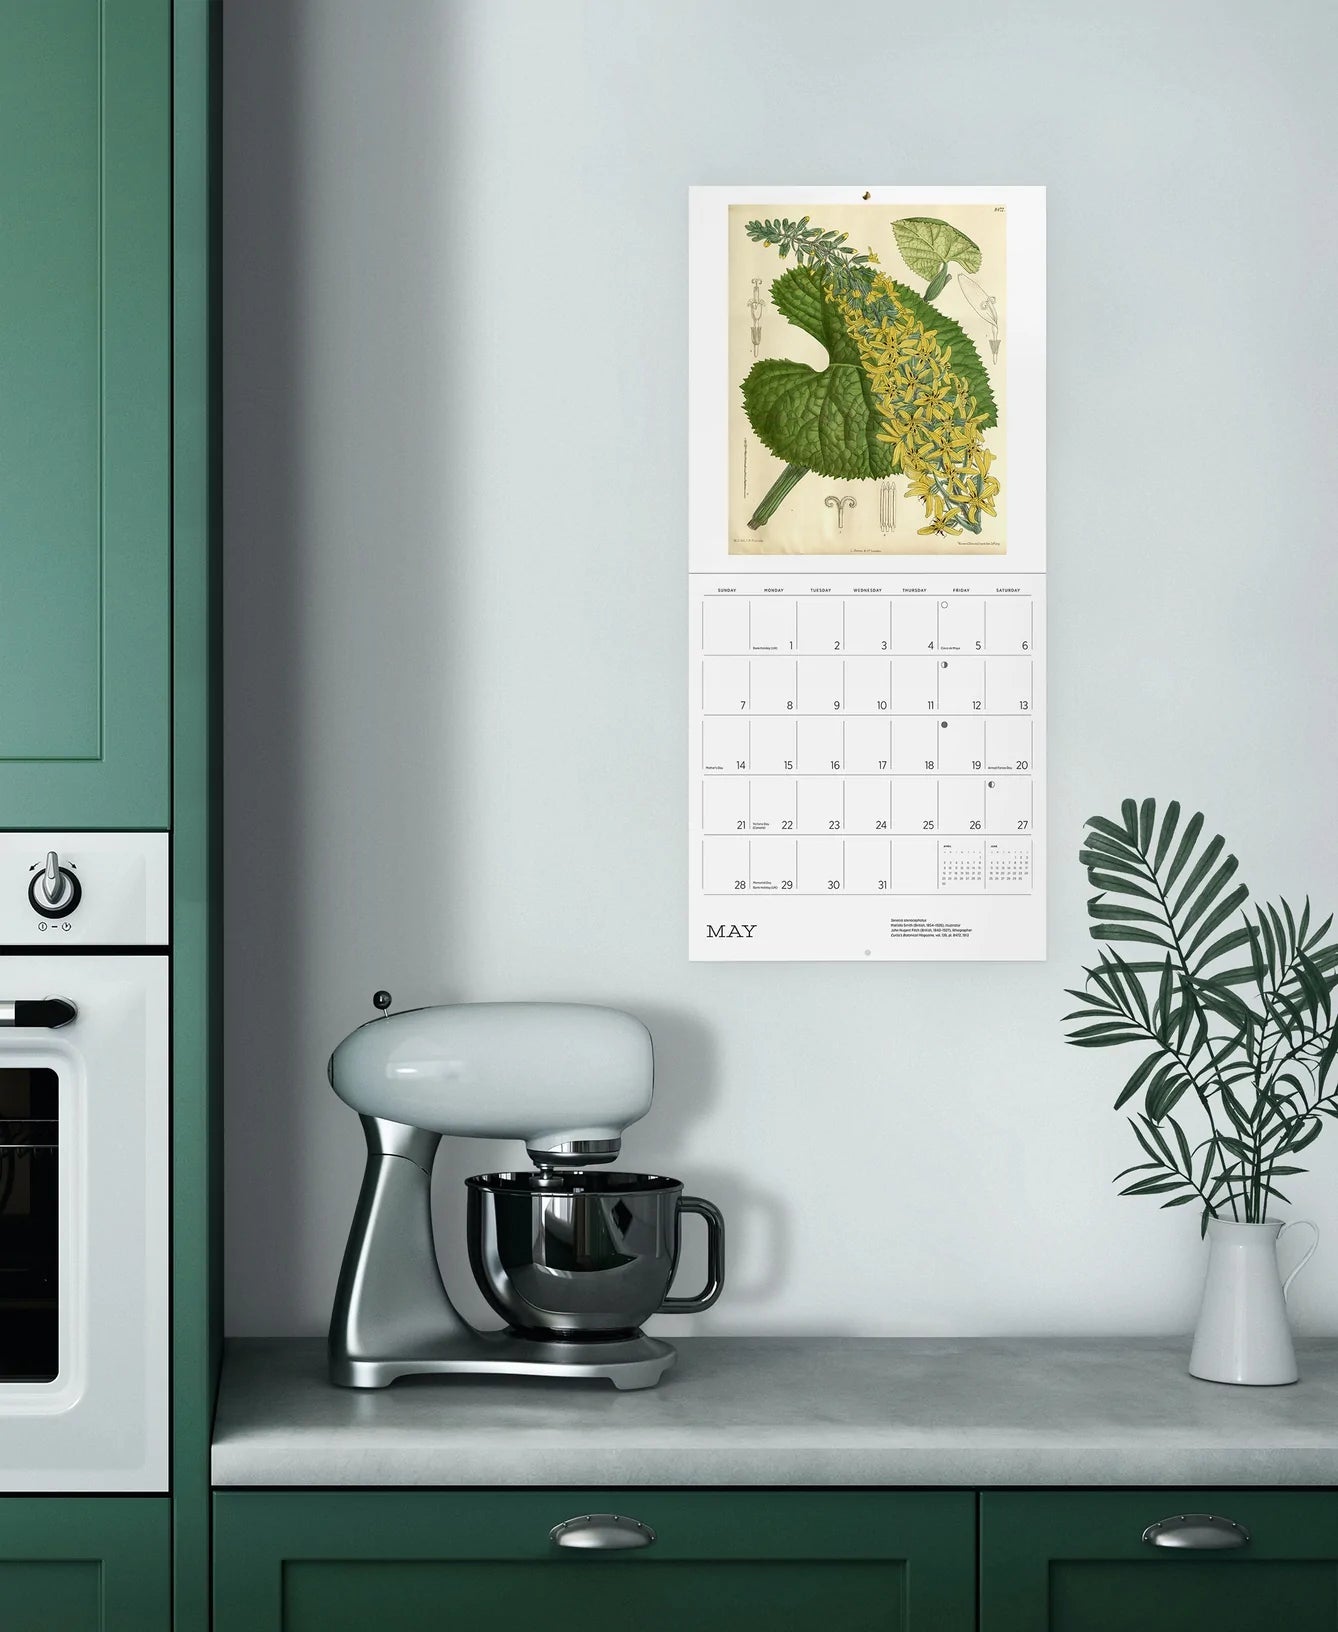 2023 The Illustrated Garden - Square Wall Calendar